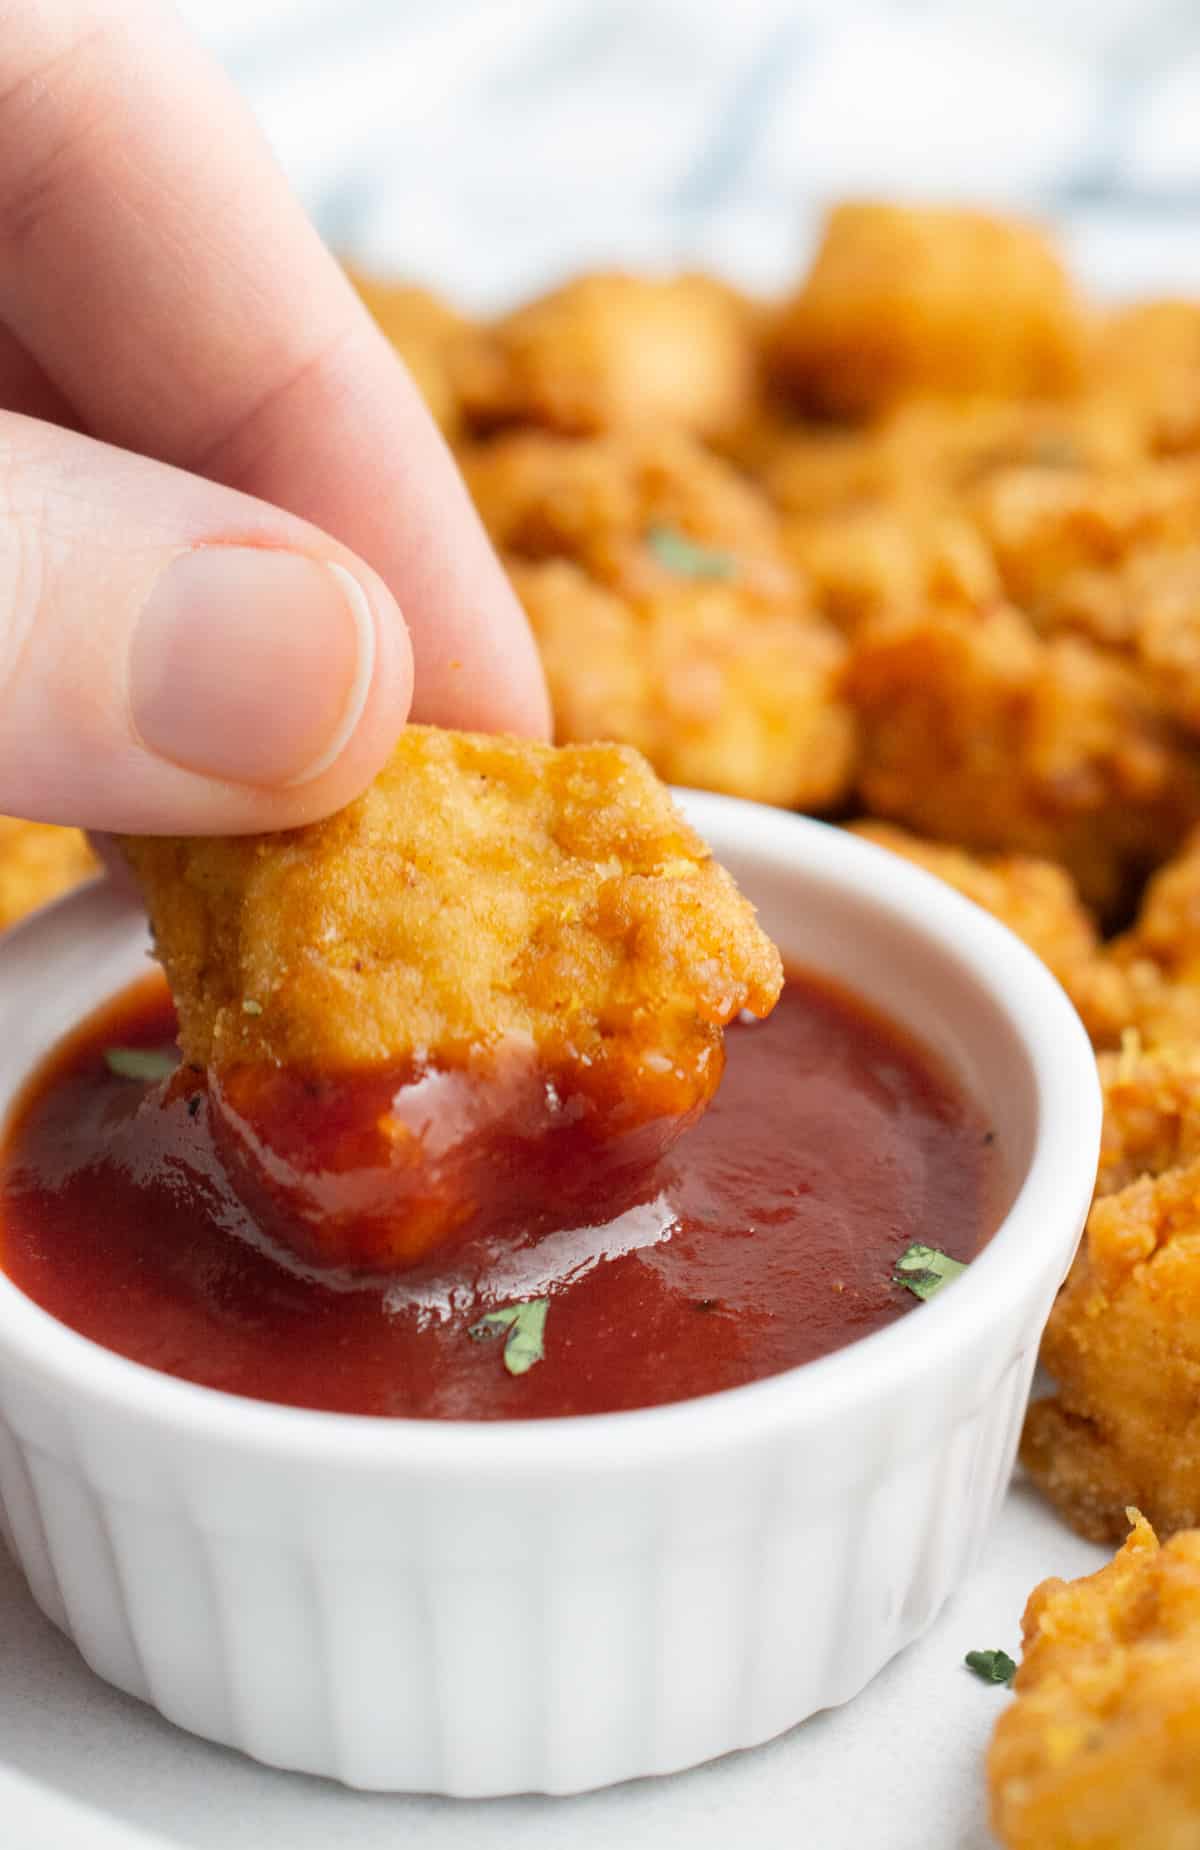 A hand dipping a tofu nugget into a bowl of BBQ sauce.